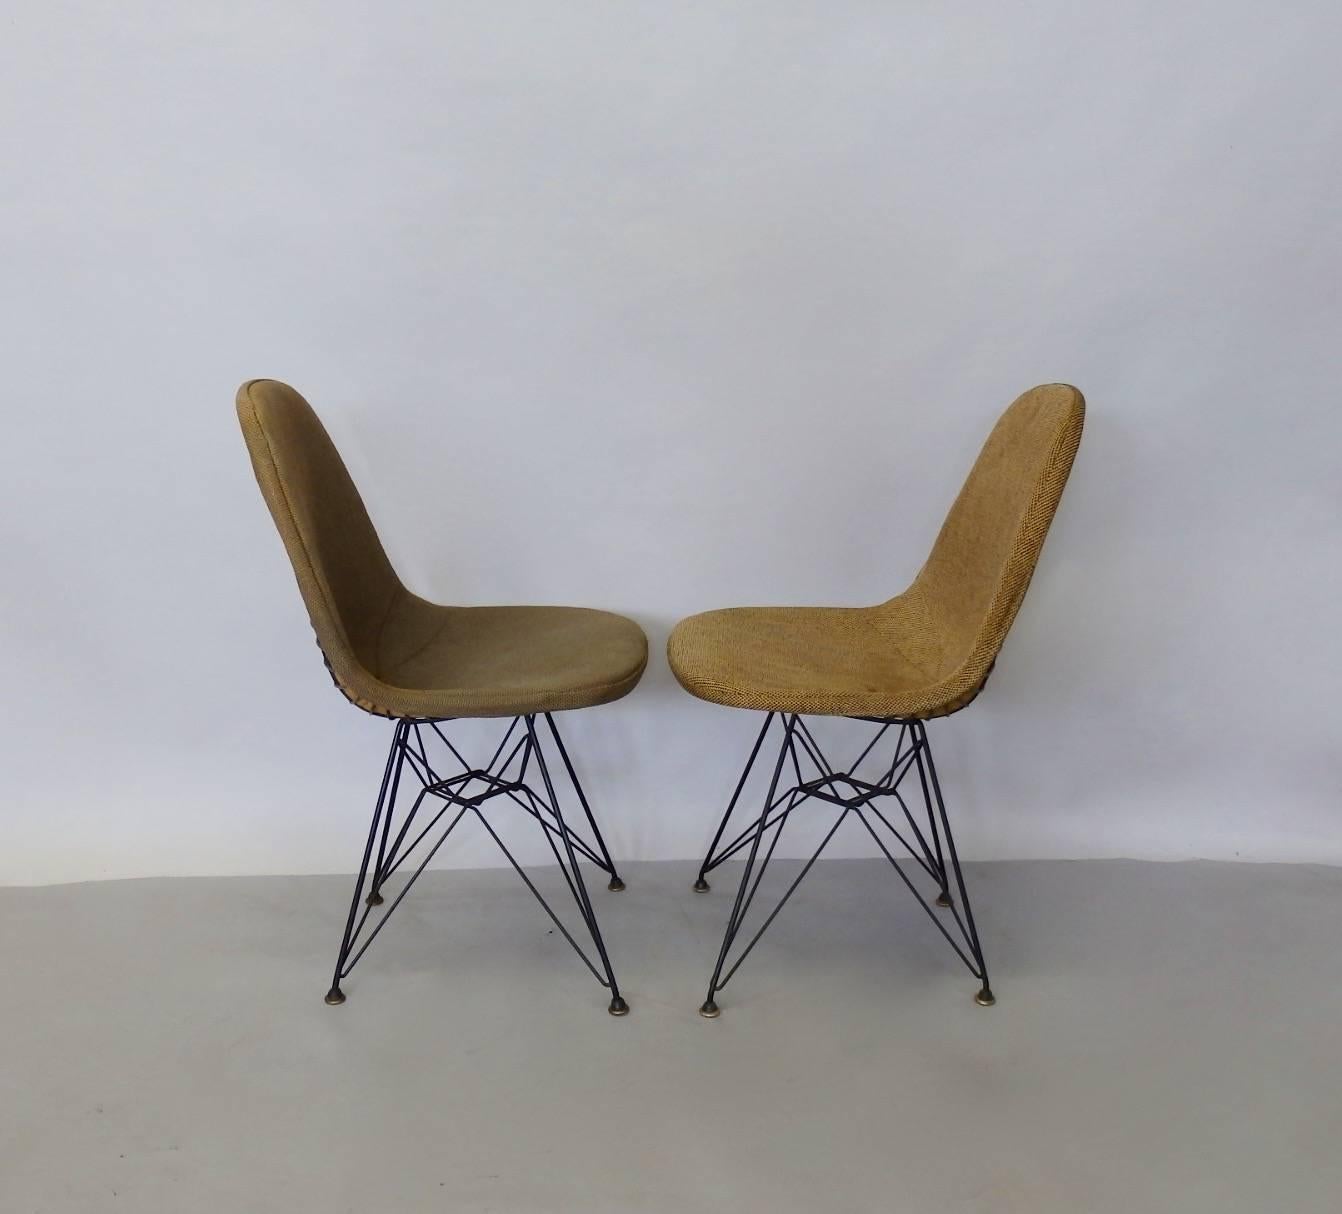 Completely original and intact Charles and Ray Eames Herman Miller DKR chairs on Eiffel tower base. Original seat covers retain labels show some minor wear. All original hardware and glides. Pair are from the same home but have different covers.